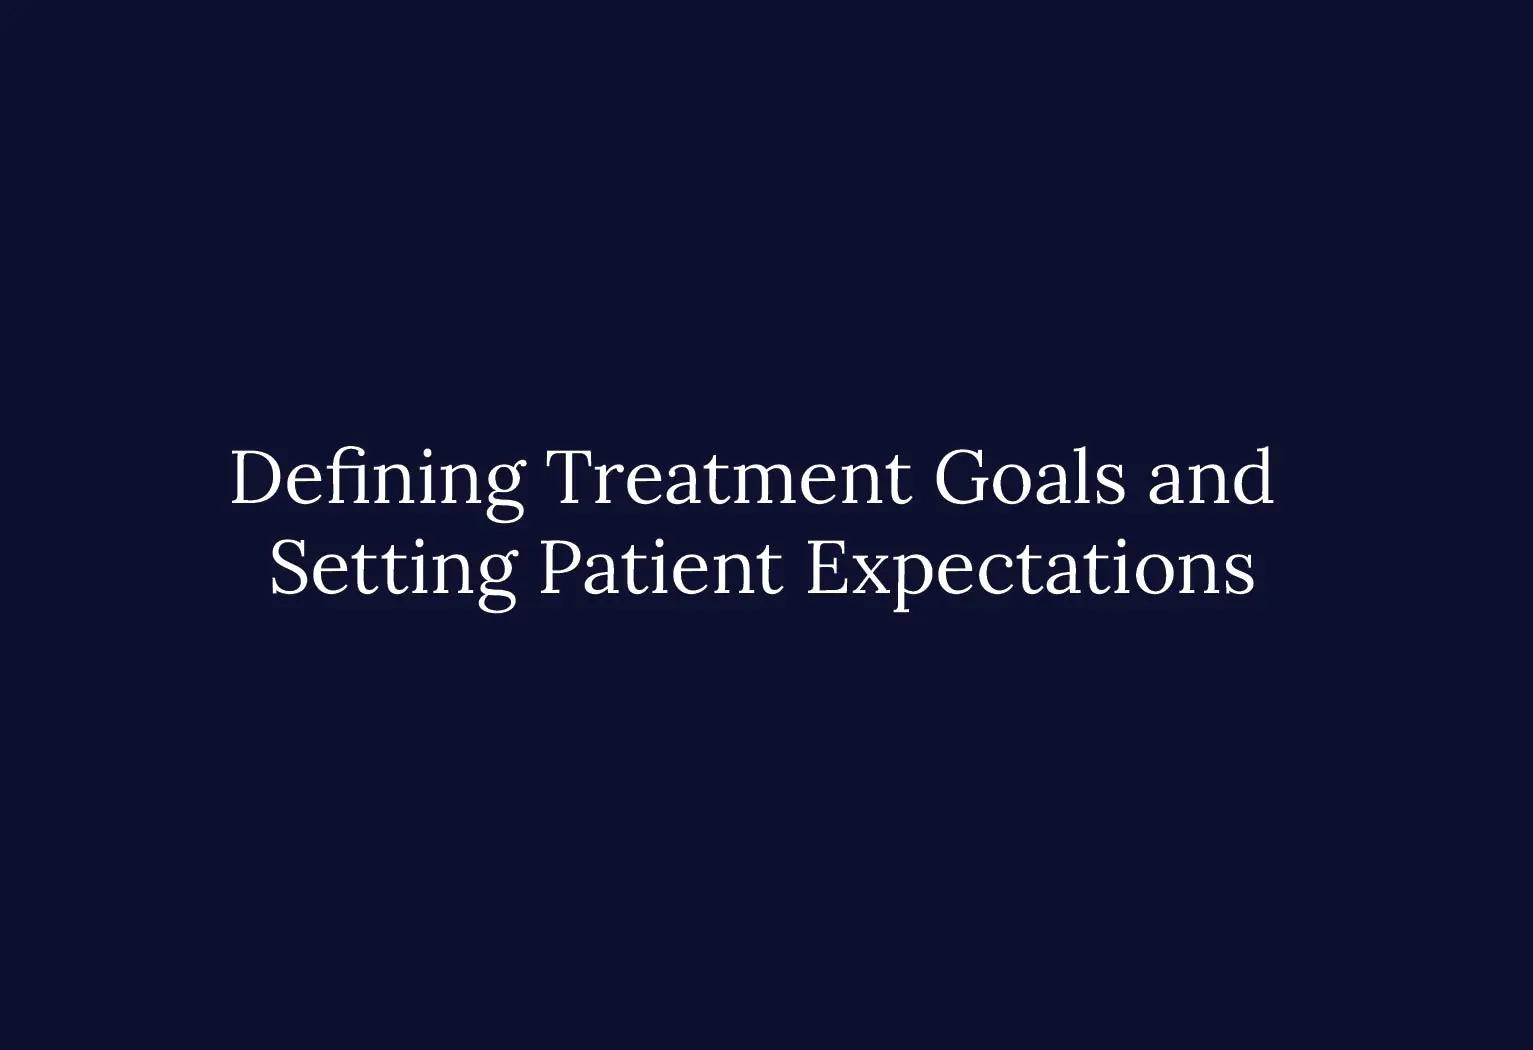 Defining Treatment Goals and Setting Patient Expectations